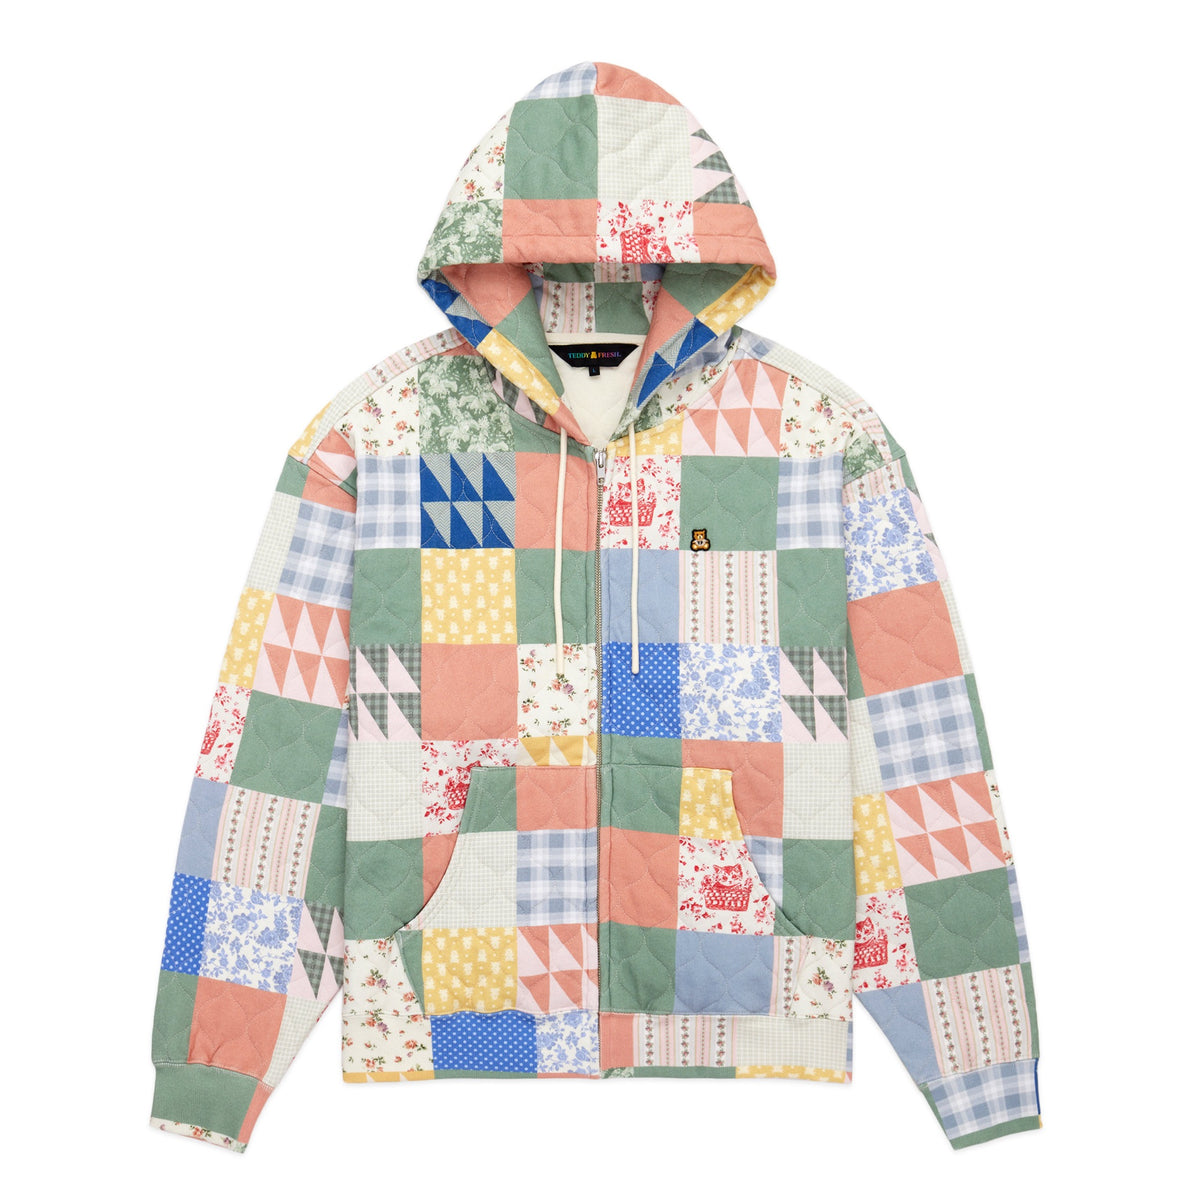 Teddy Fresh - All over print quilt sets shown in one of